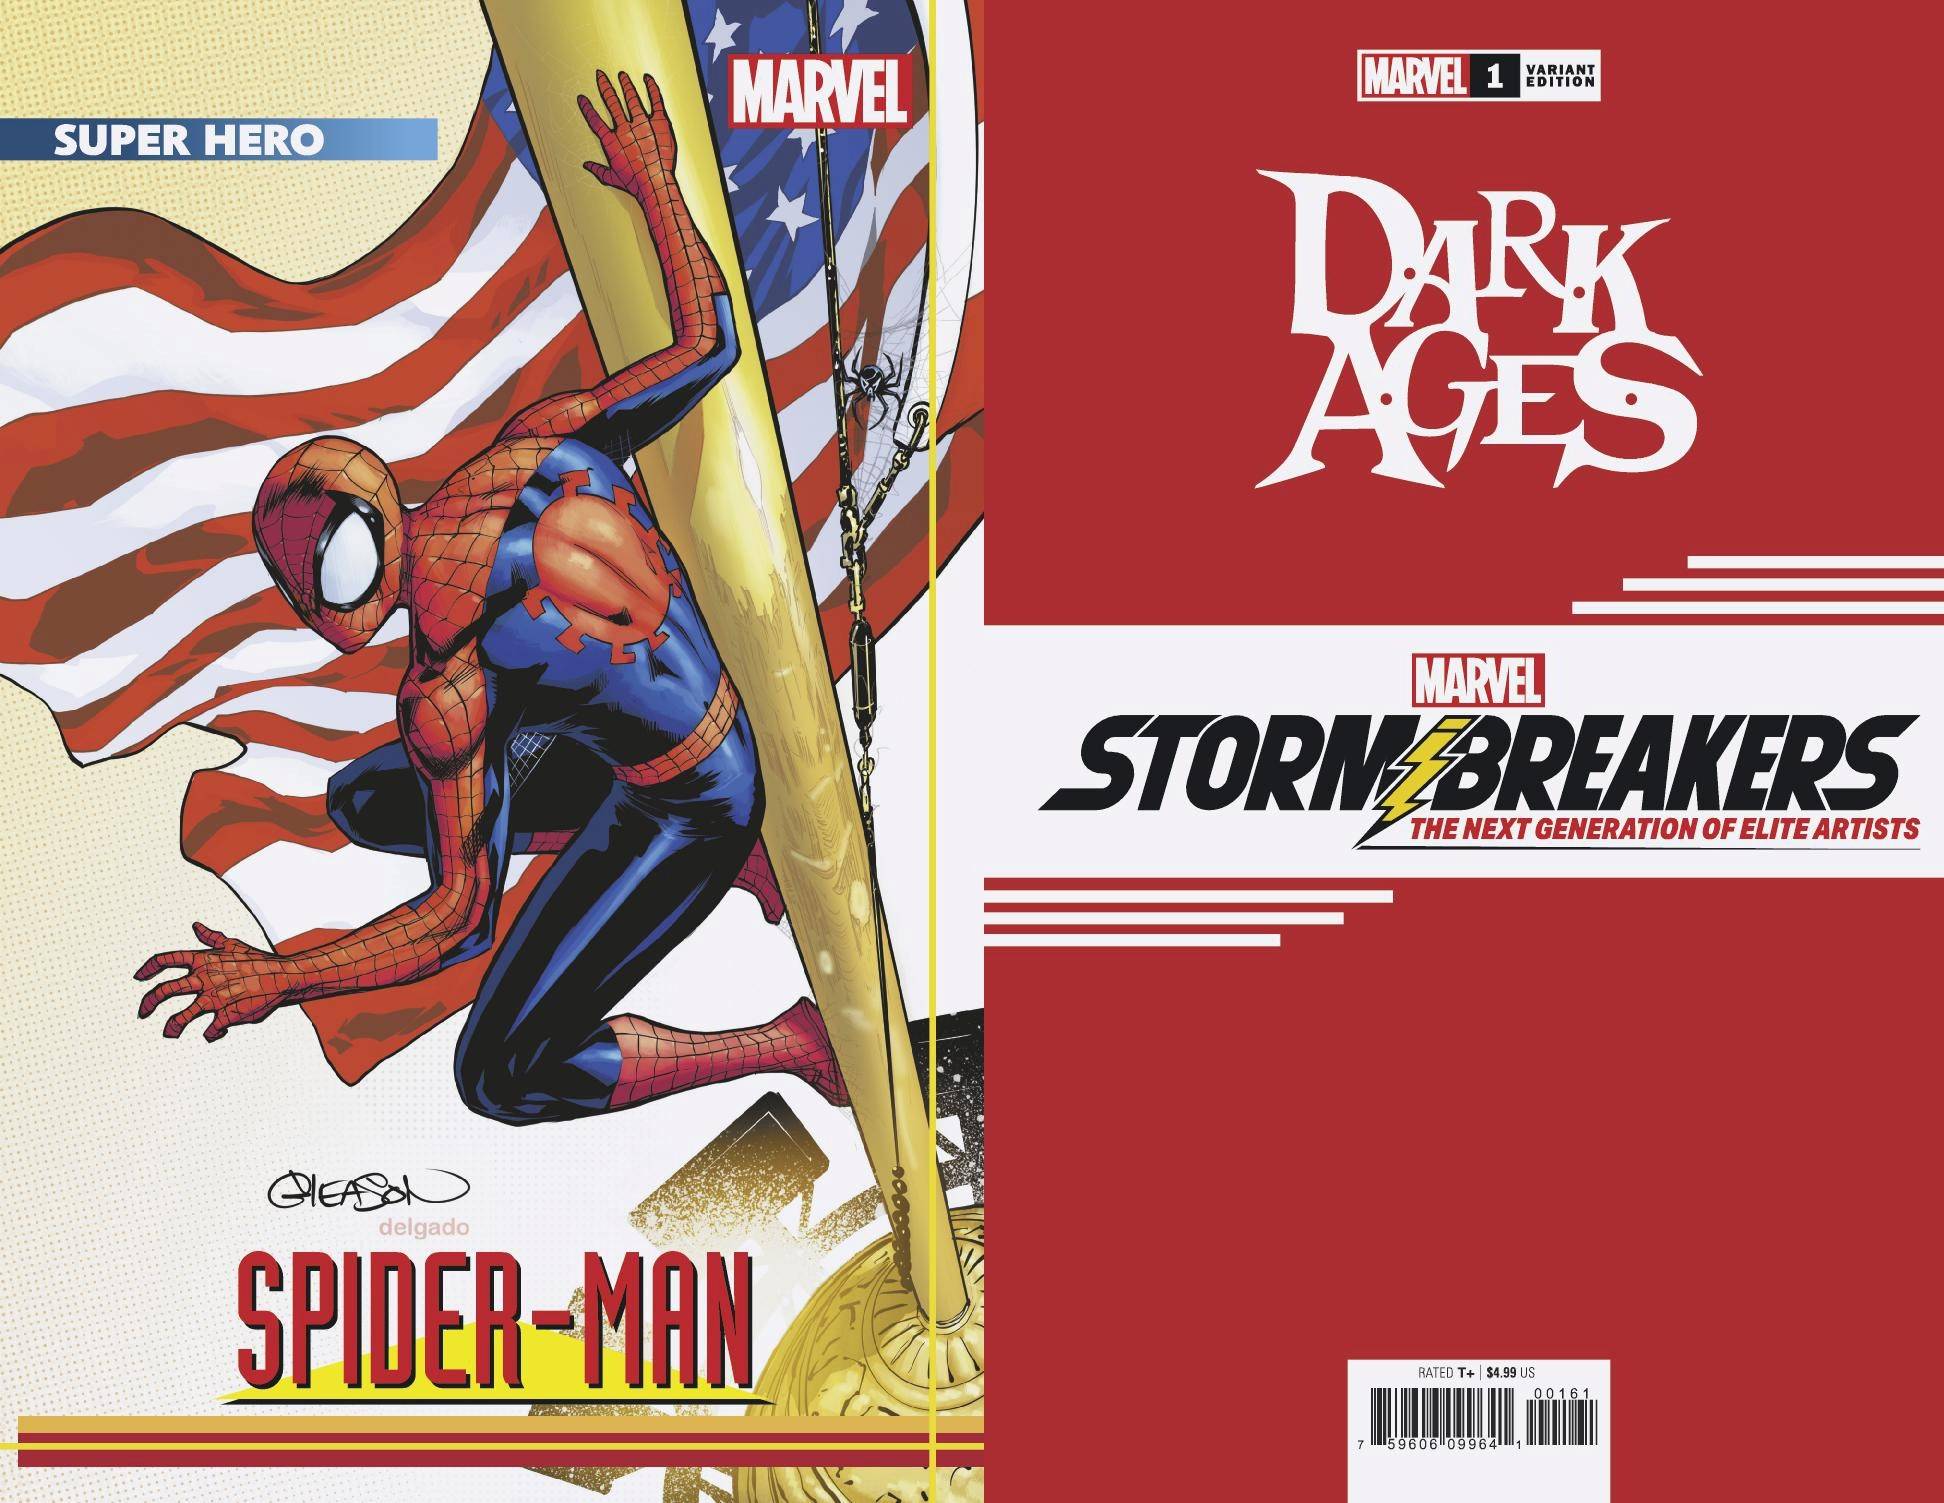 Photo of Dark Ages Issue 1 (of 6) Gleason Stormbreakers Var comic sold by Stronghold Collectibles